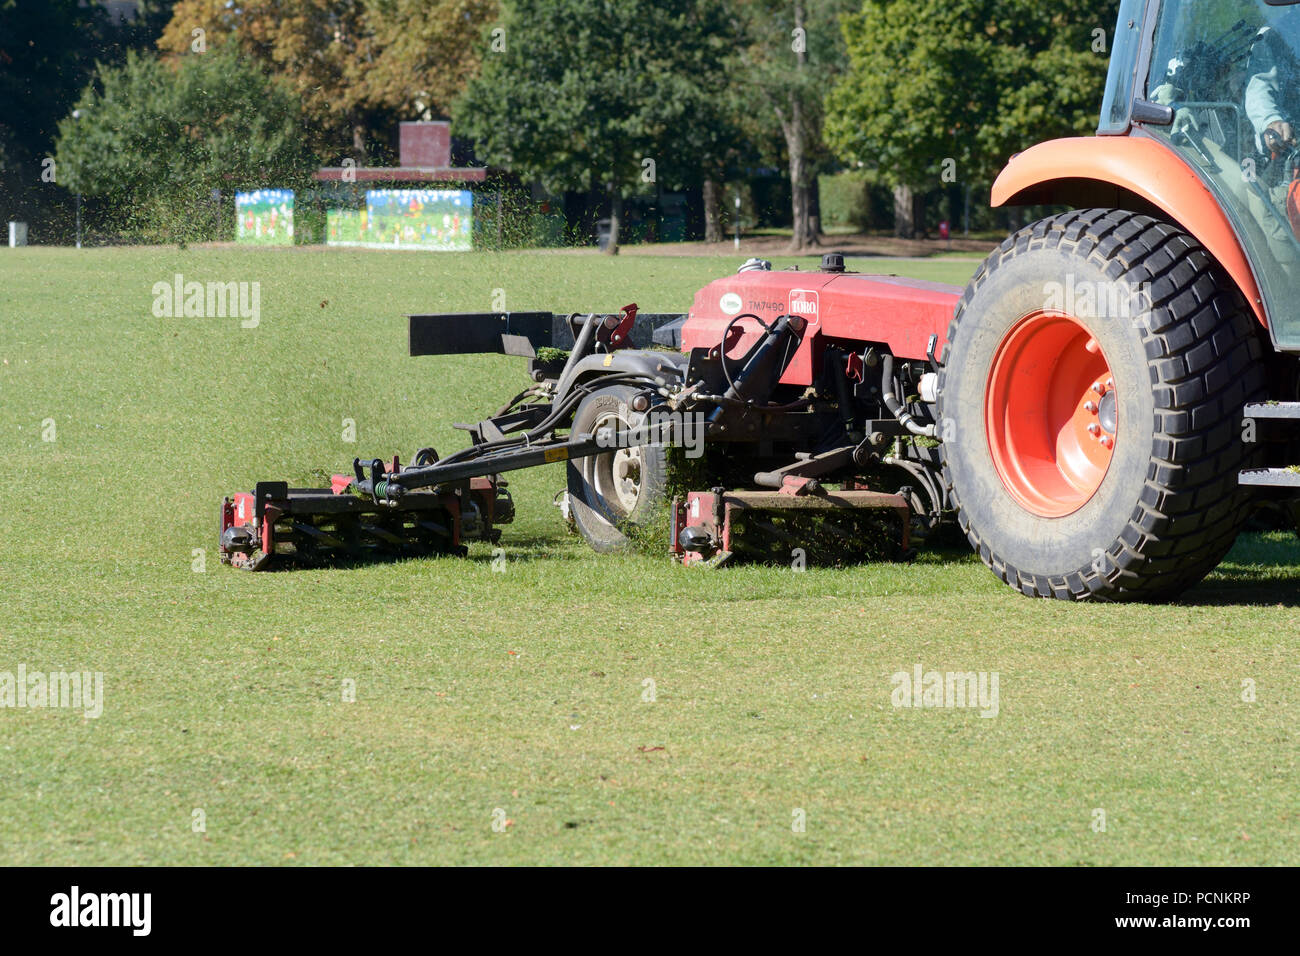 Tractor cutting grass in park that has been turned brown by the lack of rain Stock Photo